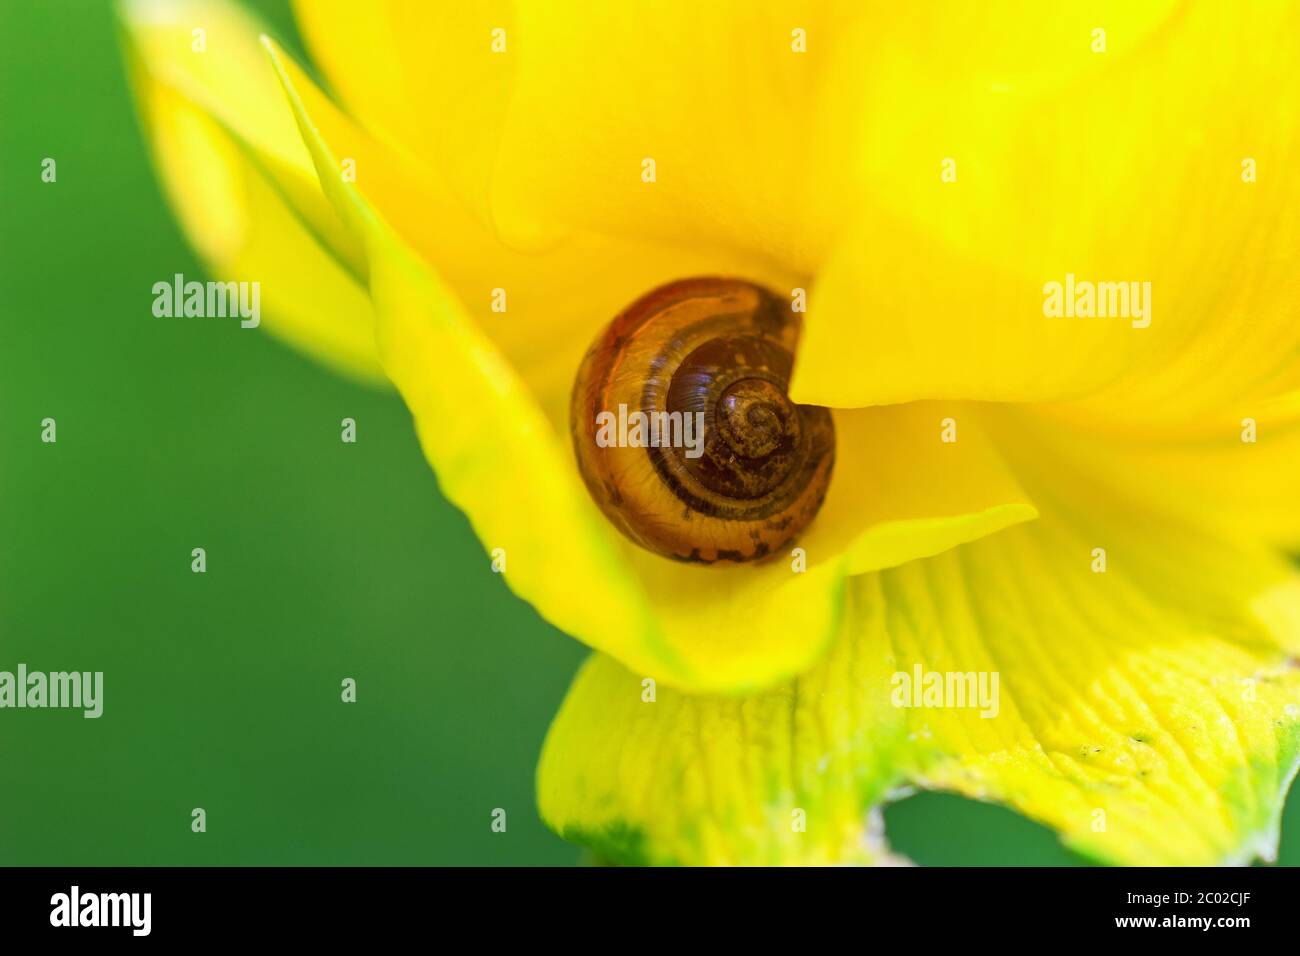 Snail lying in a yellow flower Stock Photo